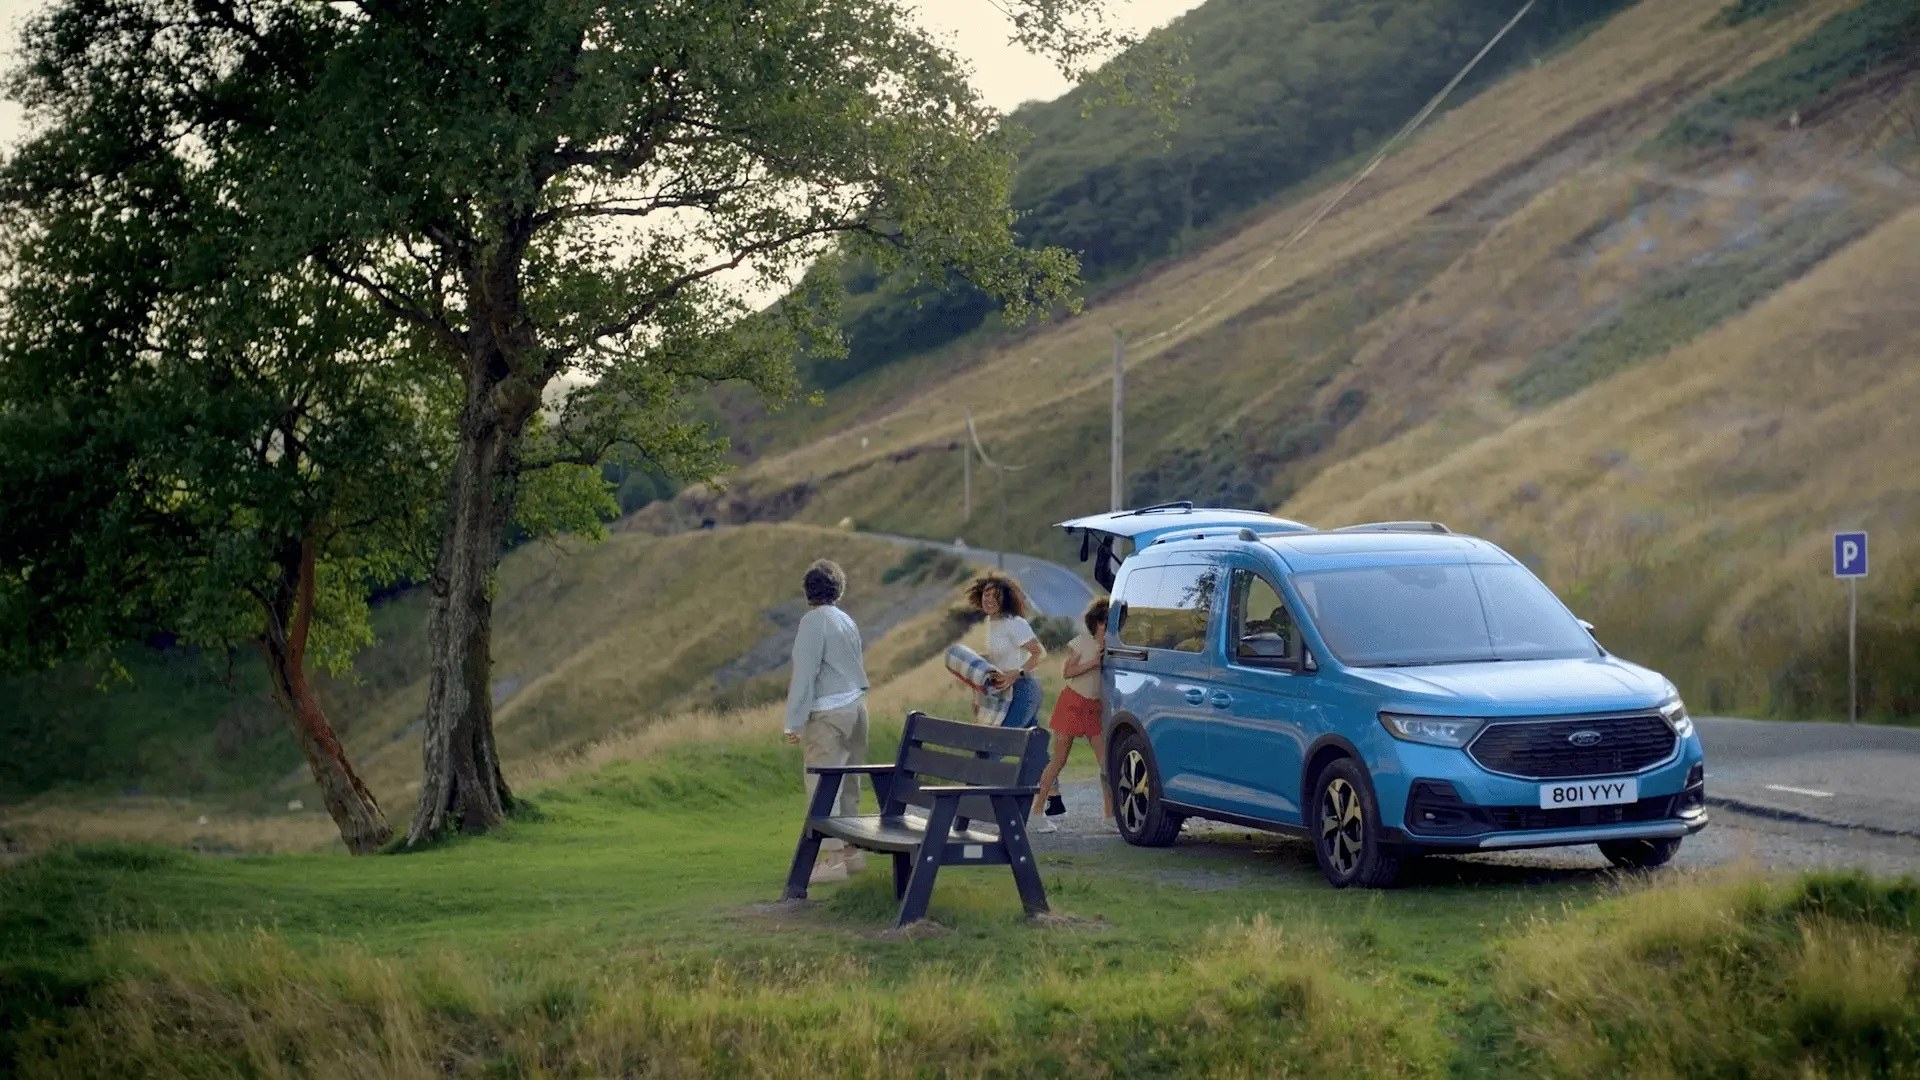 From the 'AS VERSATILE AS YOU ARE' Ford Tournero Connect commercial directed by Davy Lazare. A family parked by the mountain roadside get picnic items from their Ford car boot. 